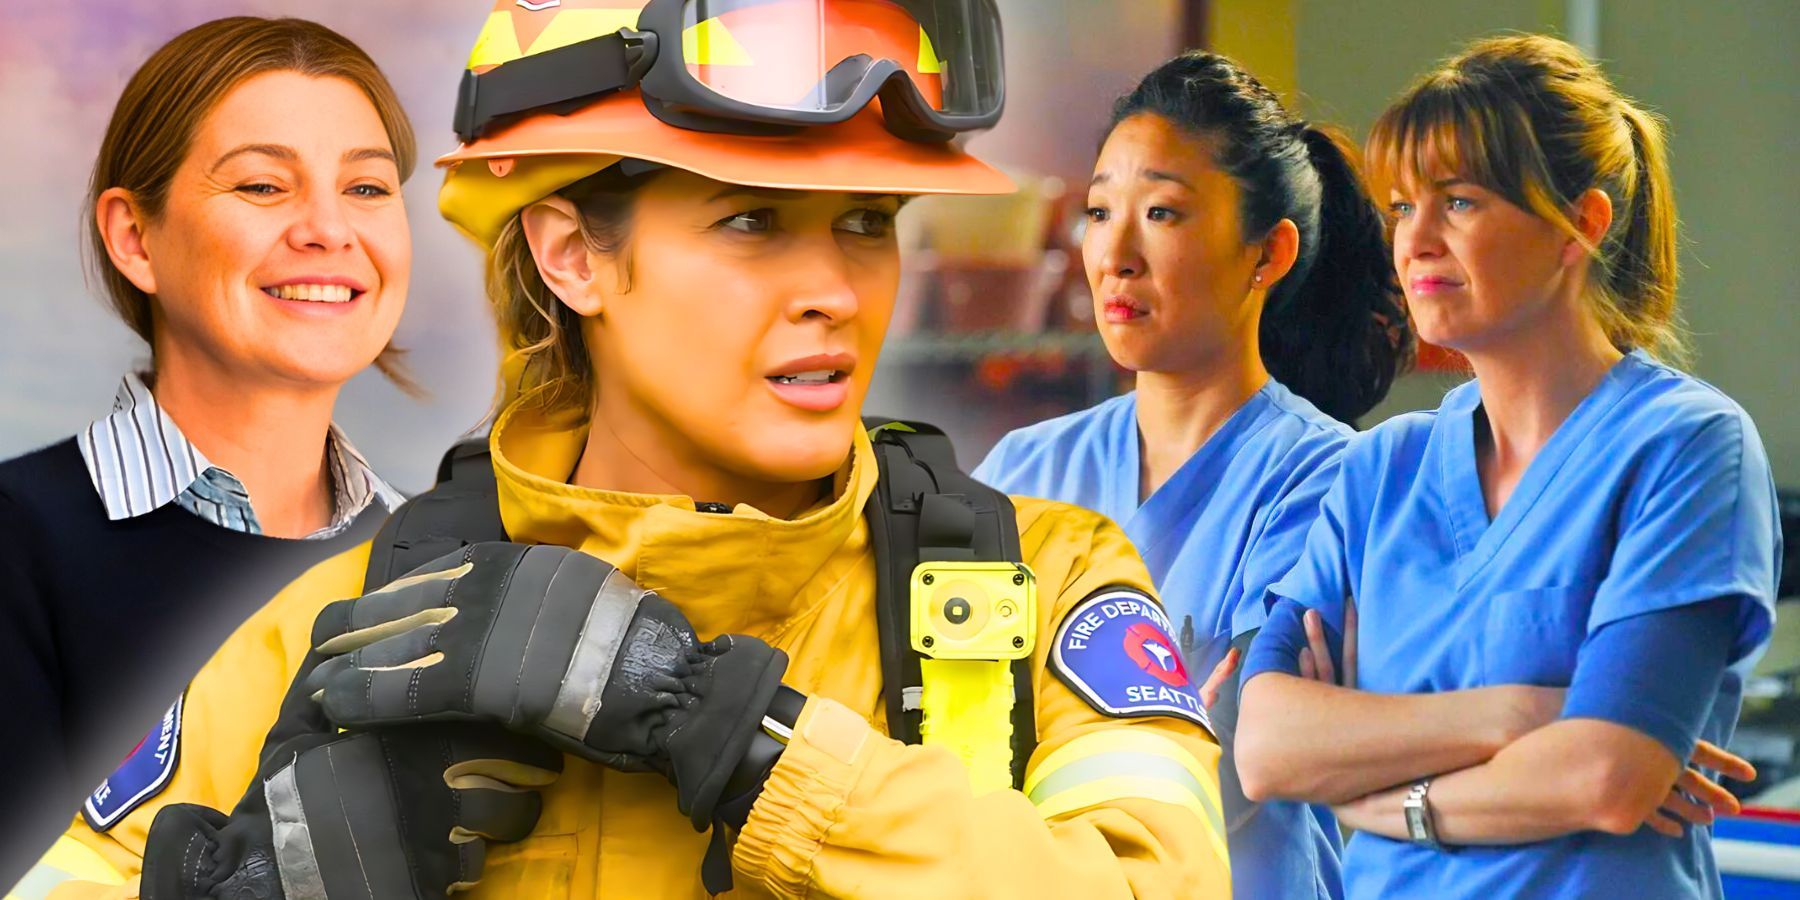 7 Reasons Station 19's Series Finale Makes Me Worried About The Ending ...